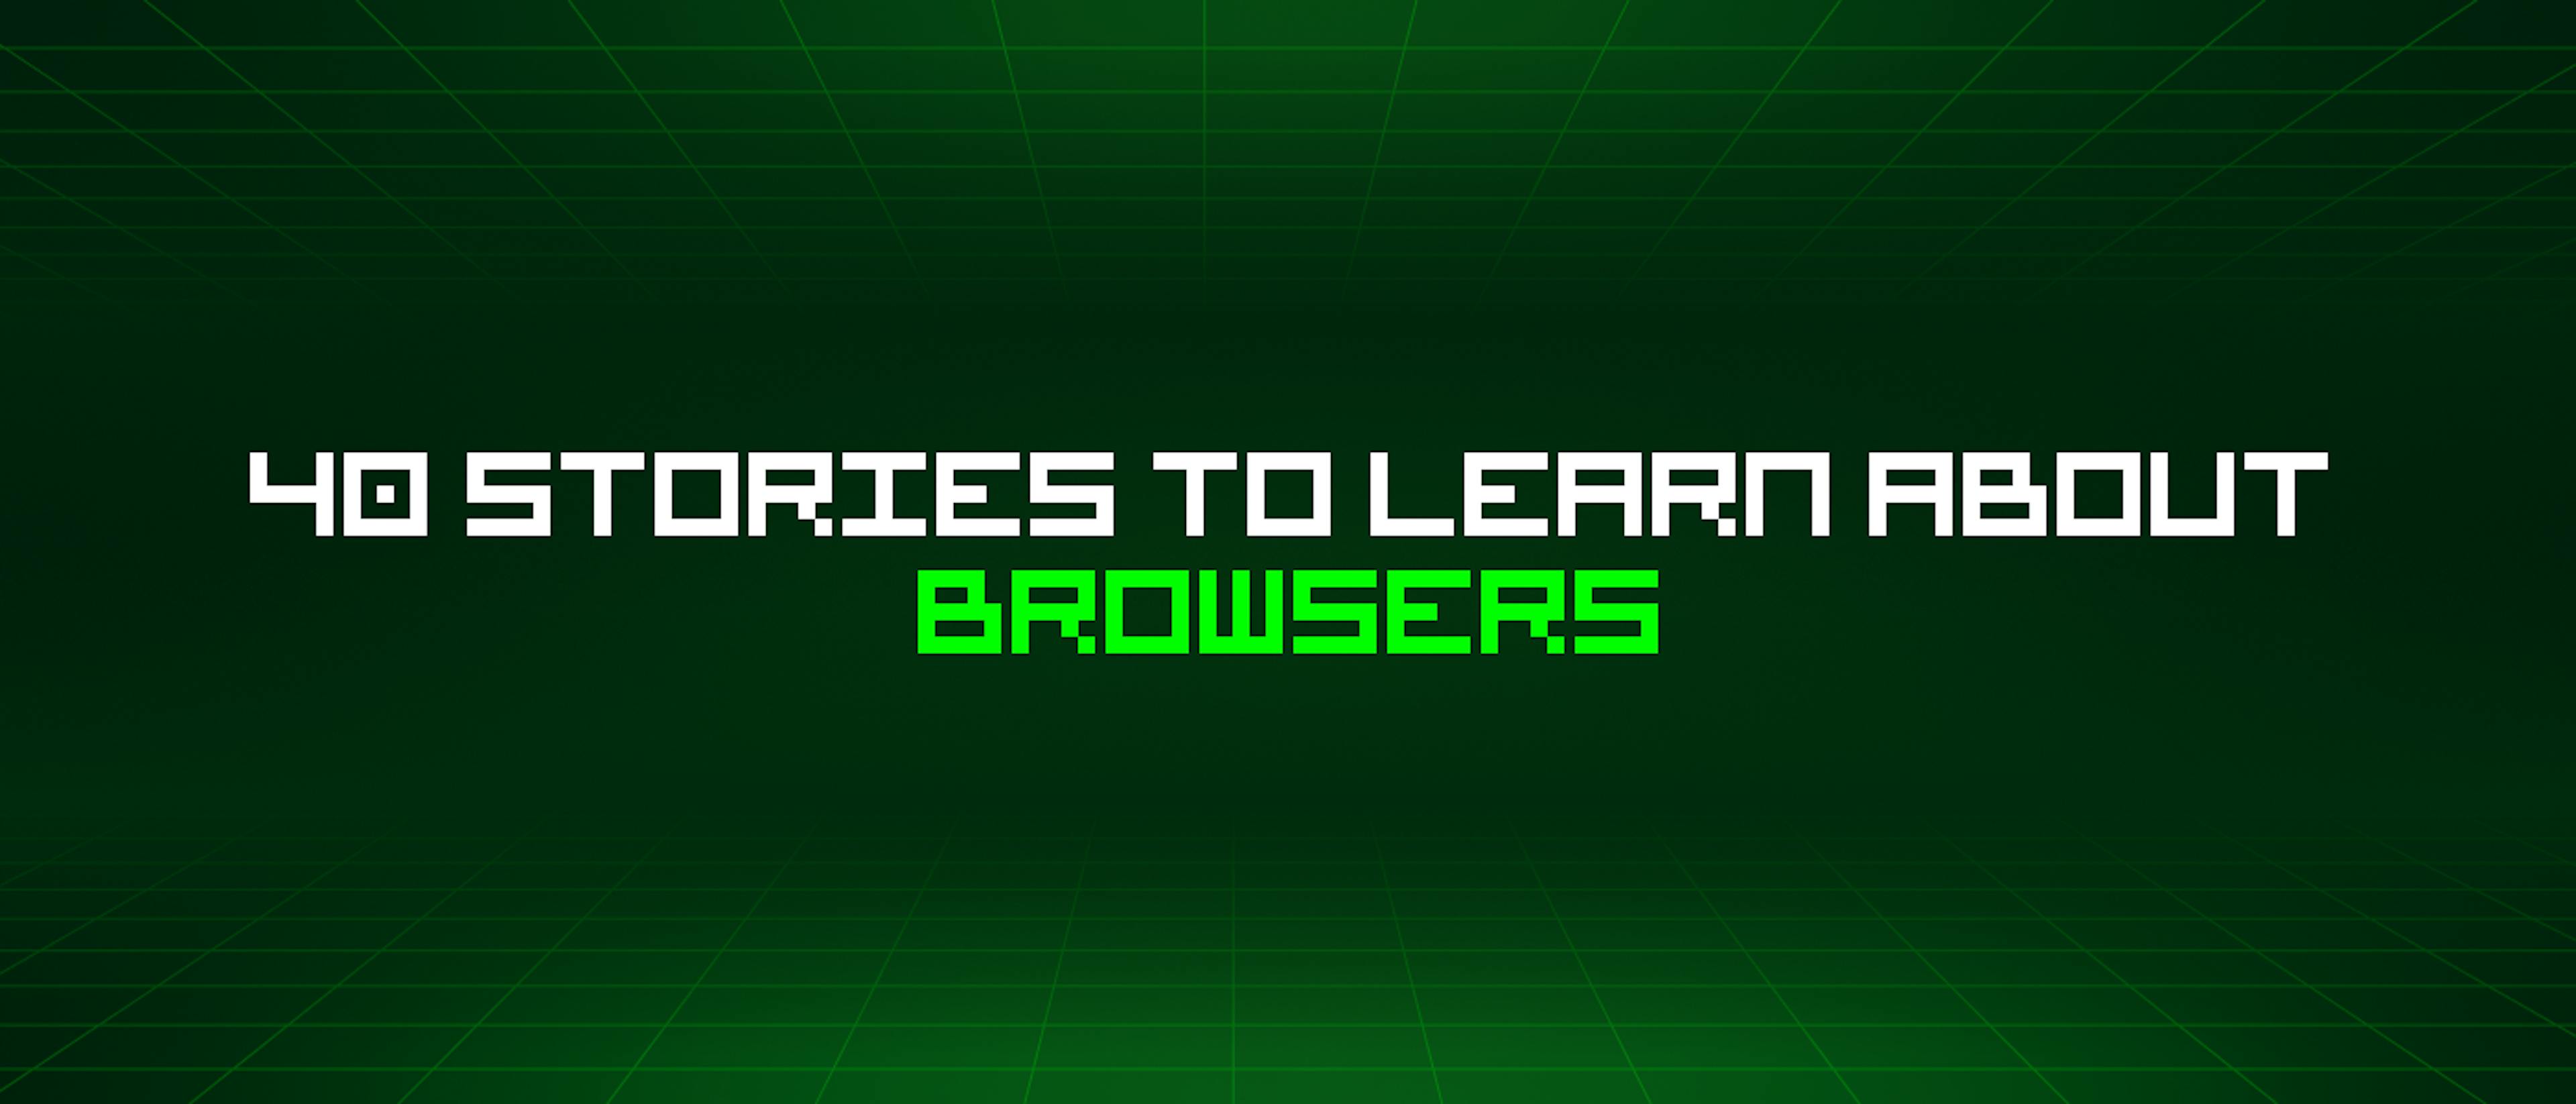 featured image - 40 Stories To Learn About Browsers